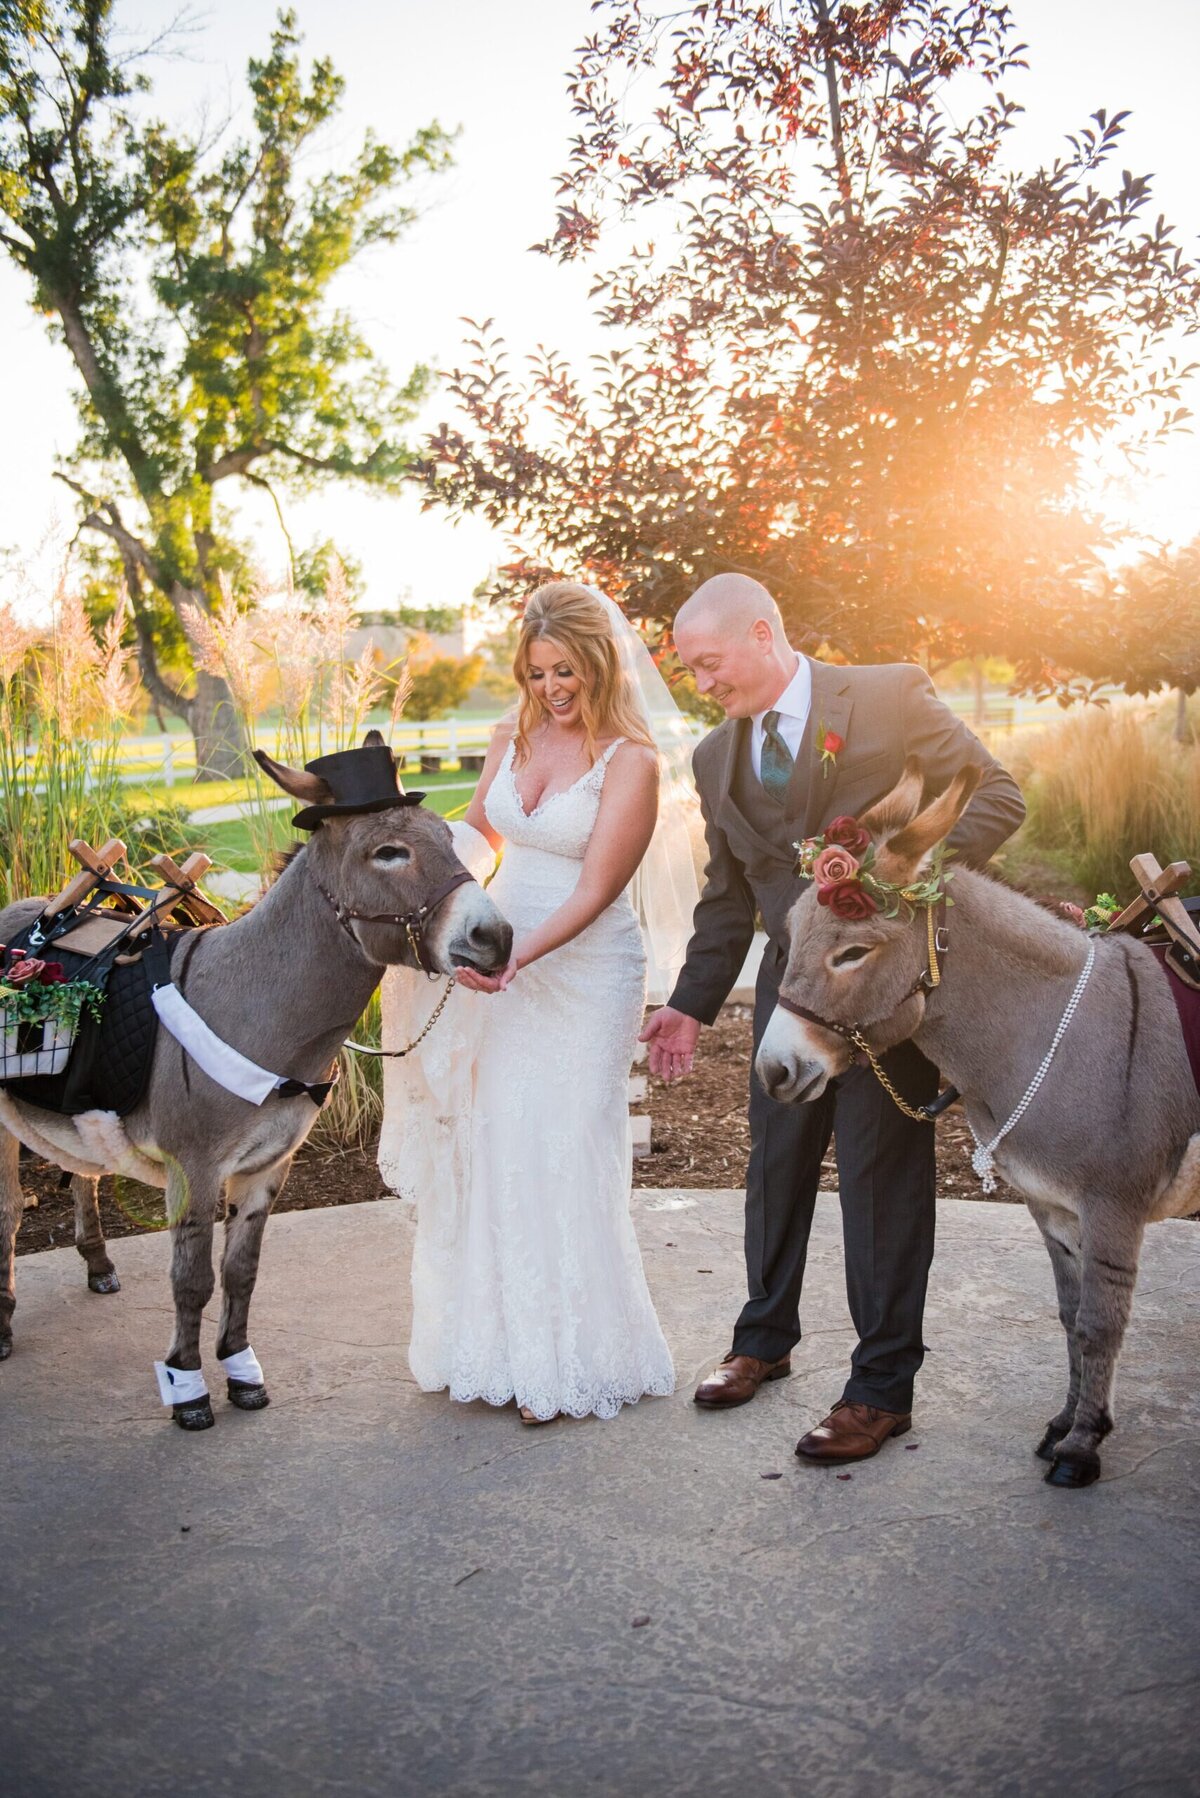 A bride and groom interact playfully with beverage burro donkeys at their wedding at The Barn at Raccoon Creek.